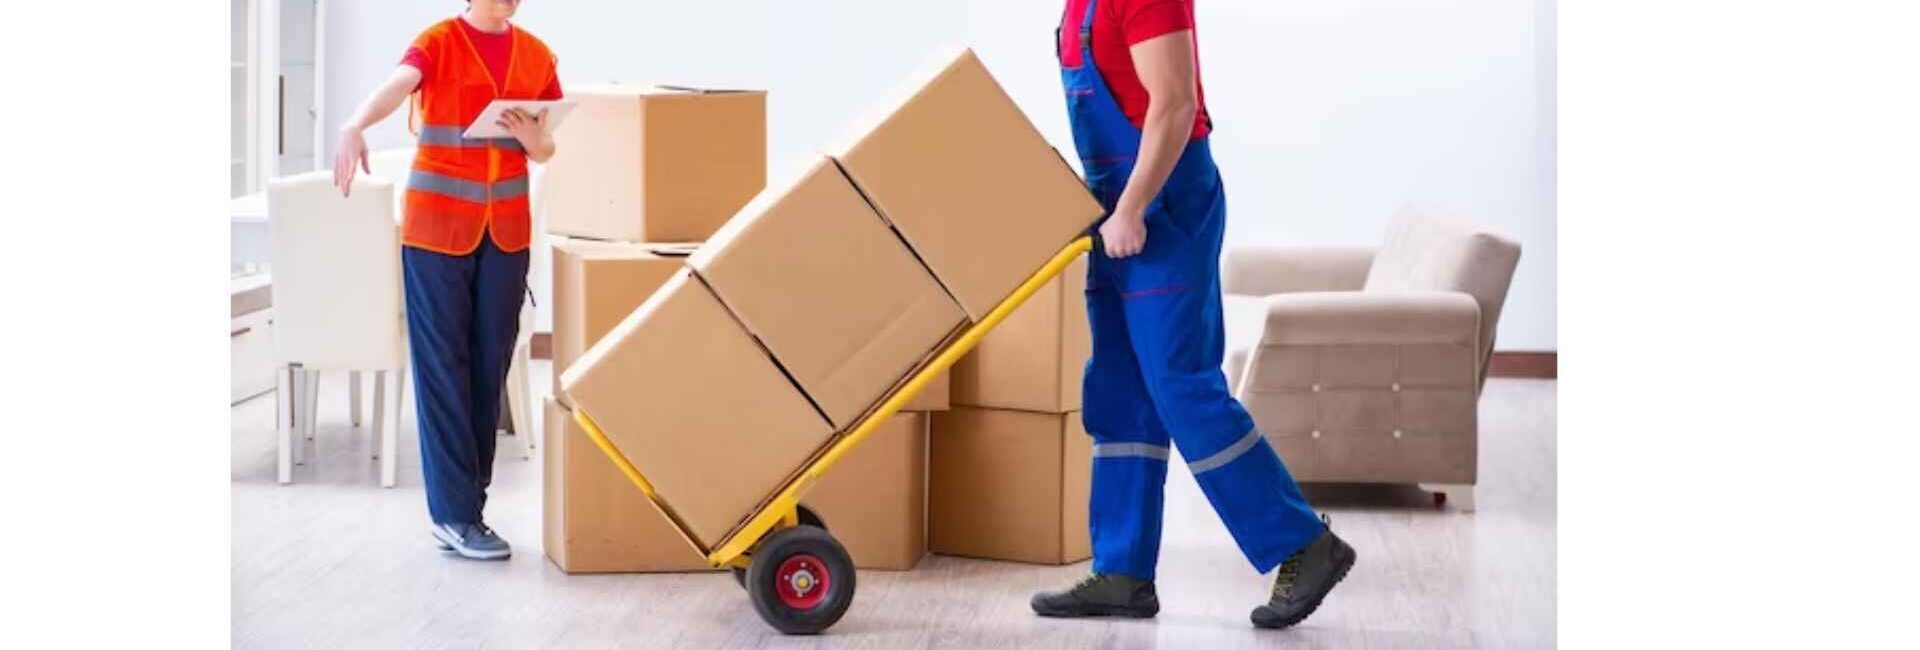 NPM Moving Co.Noida - Best Packers and Movers in Noida